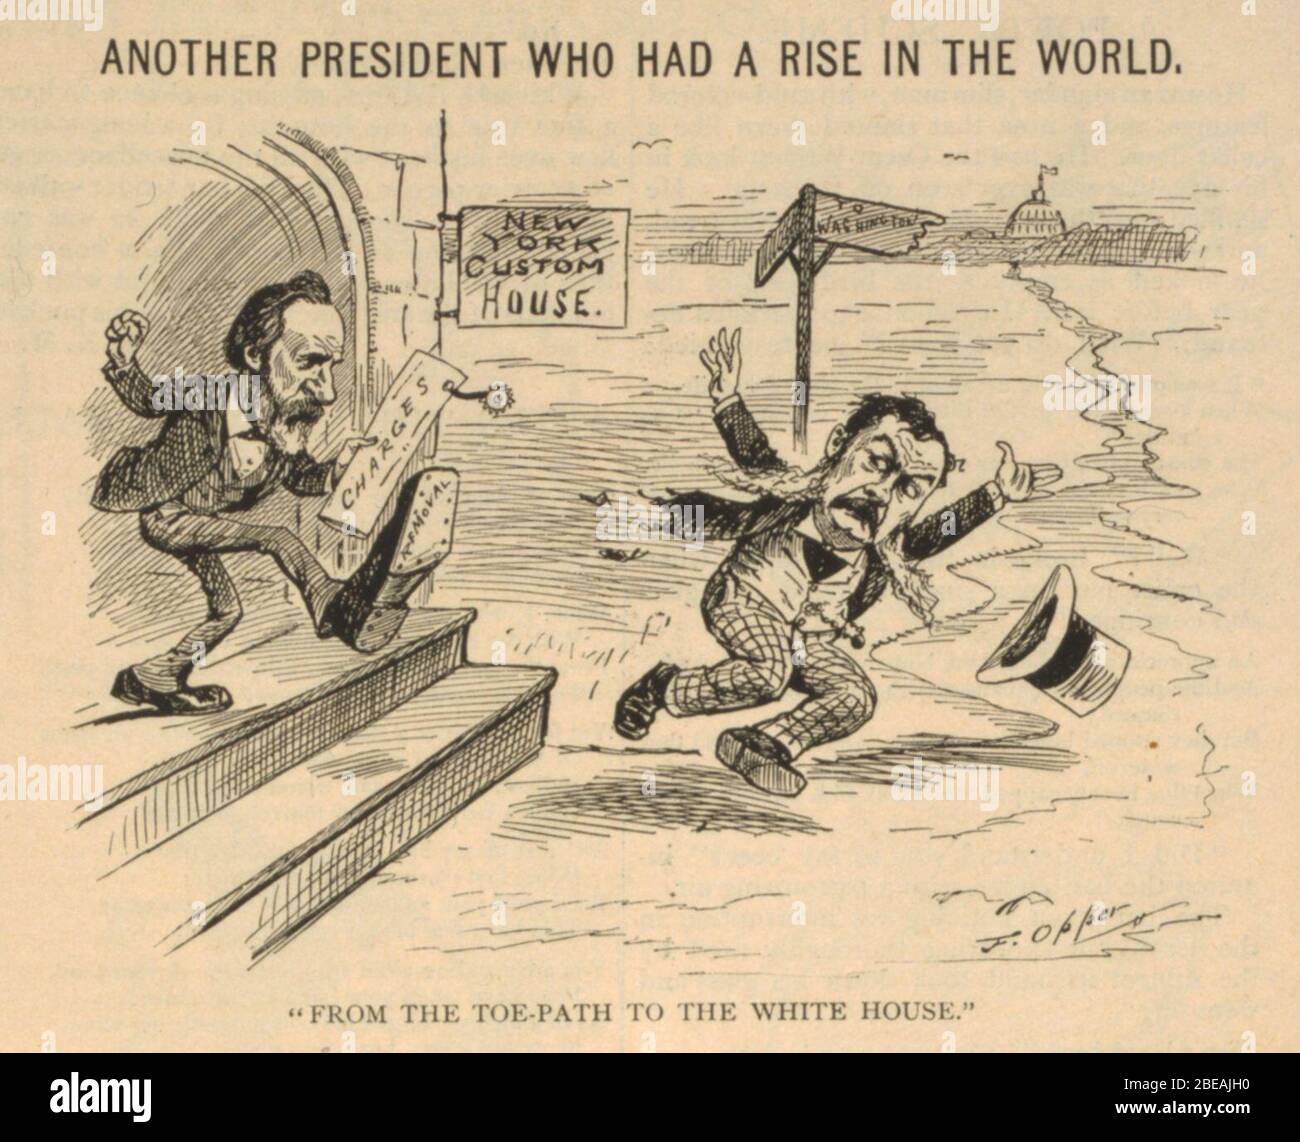 English: Page of Puck magazine with cartoon showing Chester Arthur kicked  out of the New York Custom House, by man holding paper charges, in front of  sign pointing to Washington. Another president